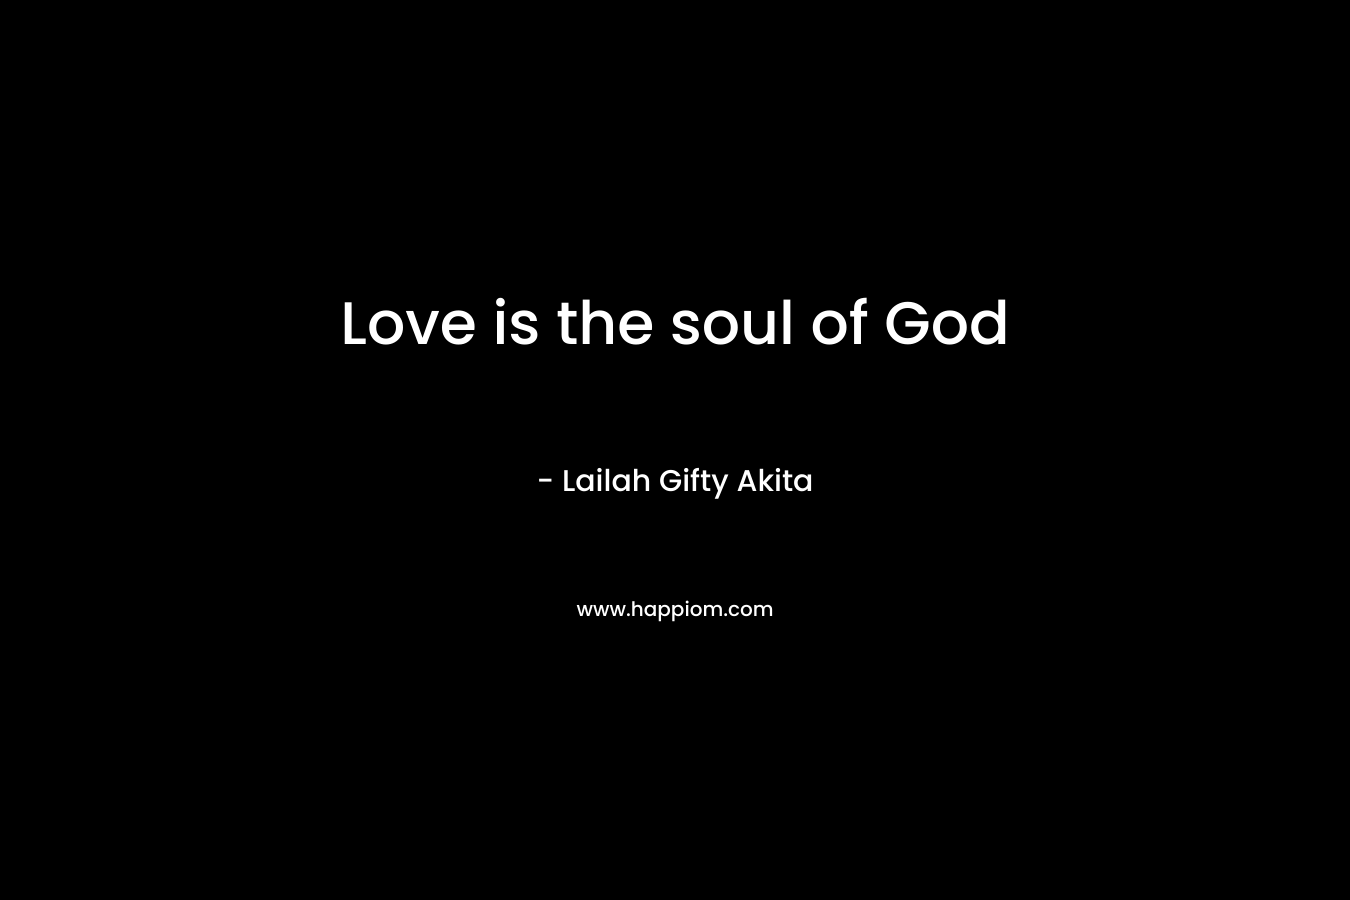 Love is the soul of God